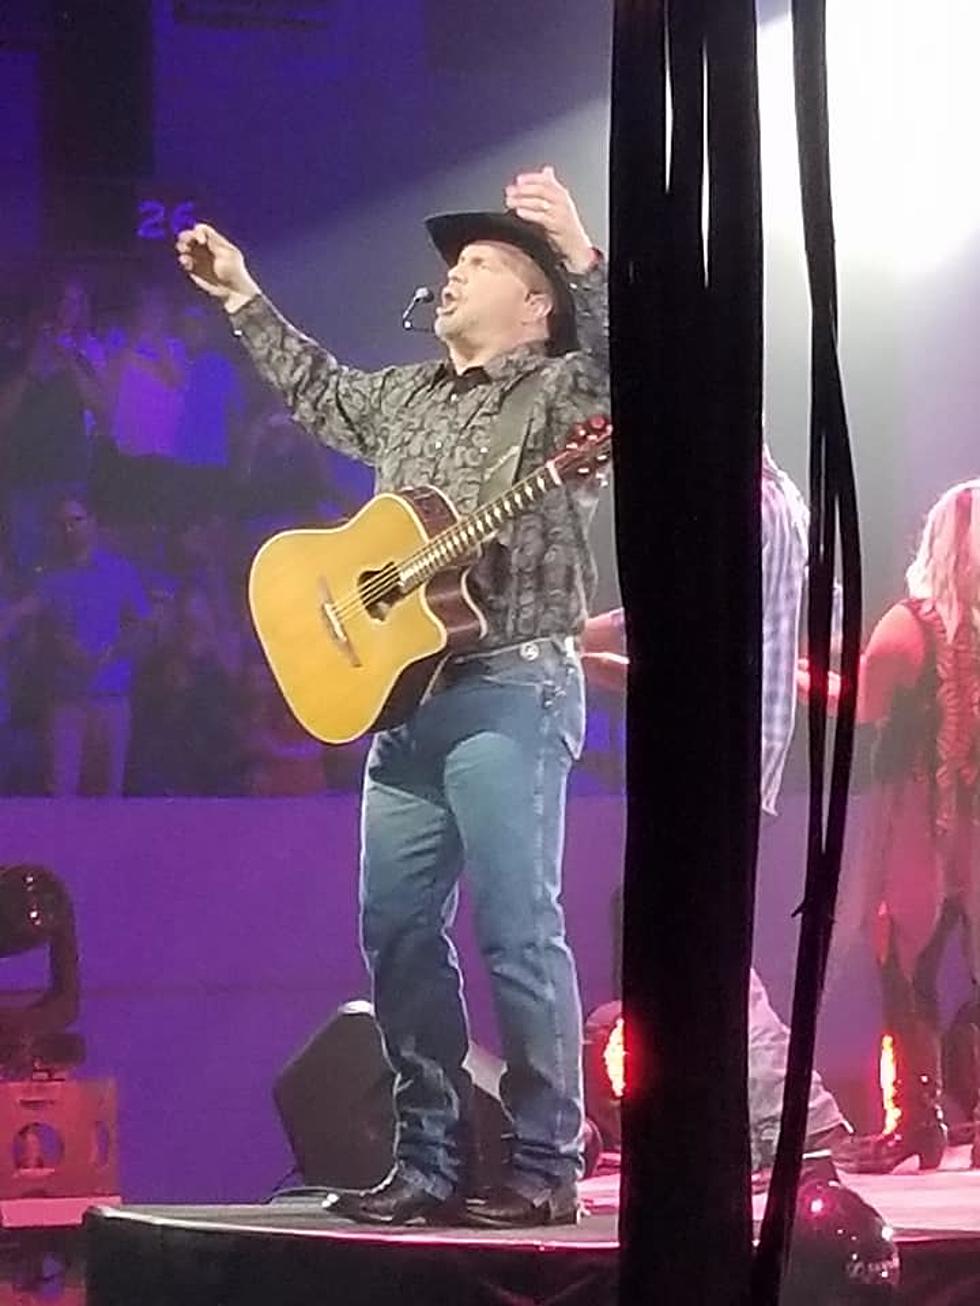 Rules and Information for Garth Brooks in Spokane